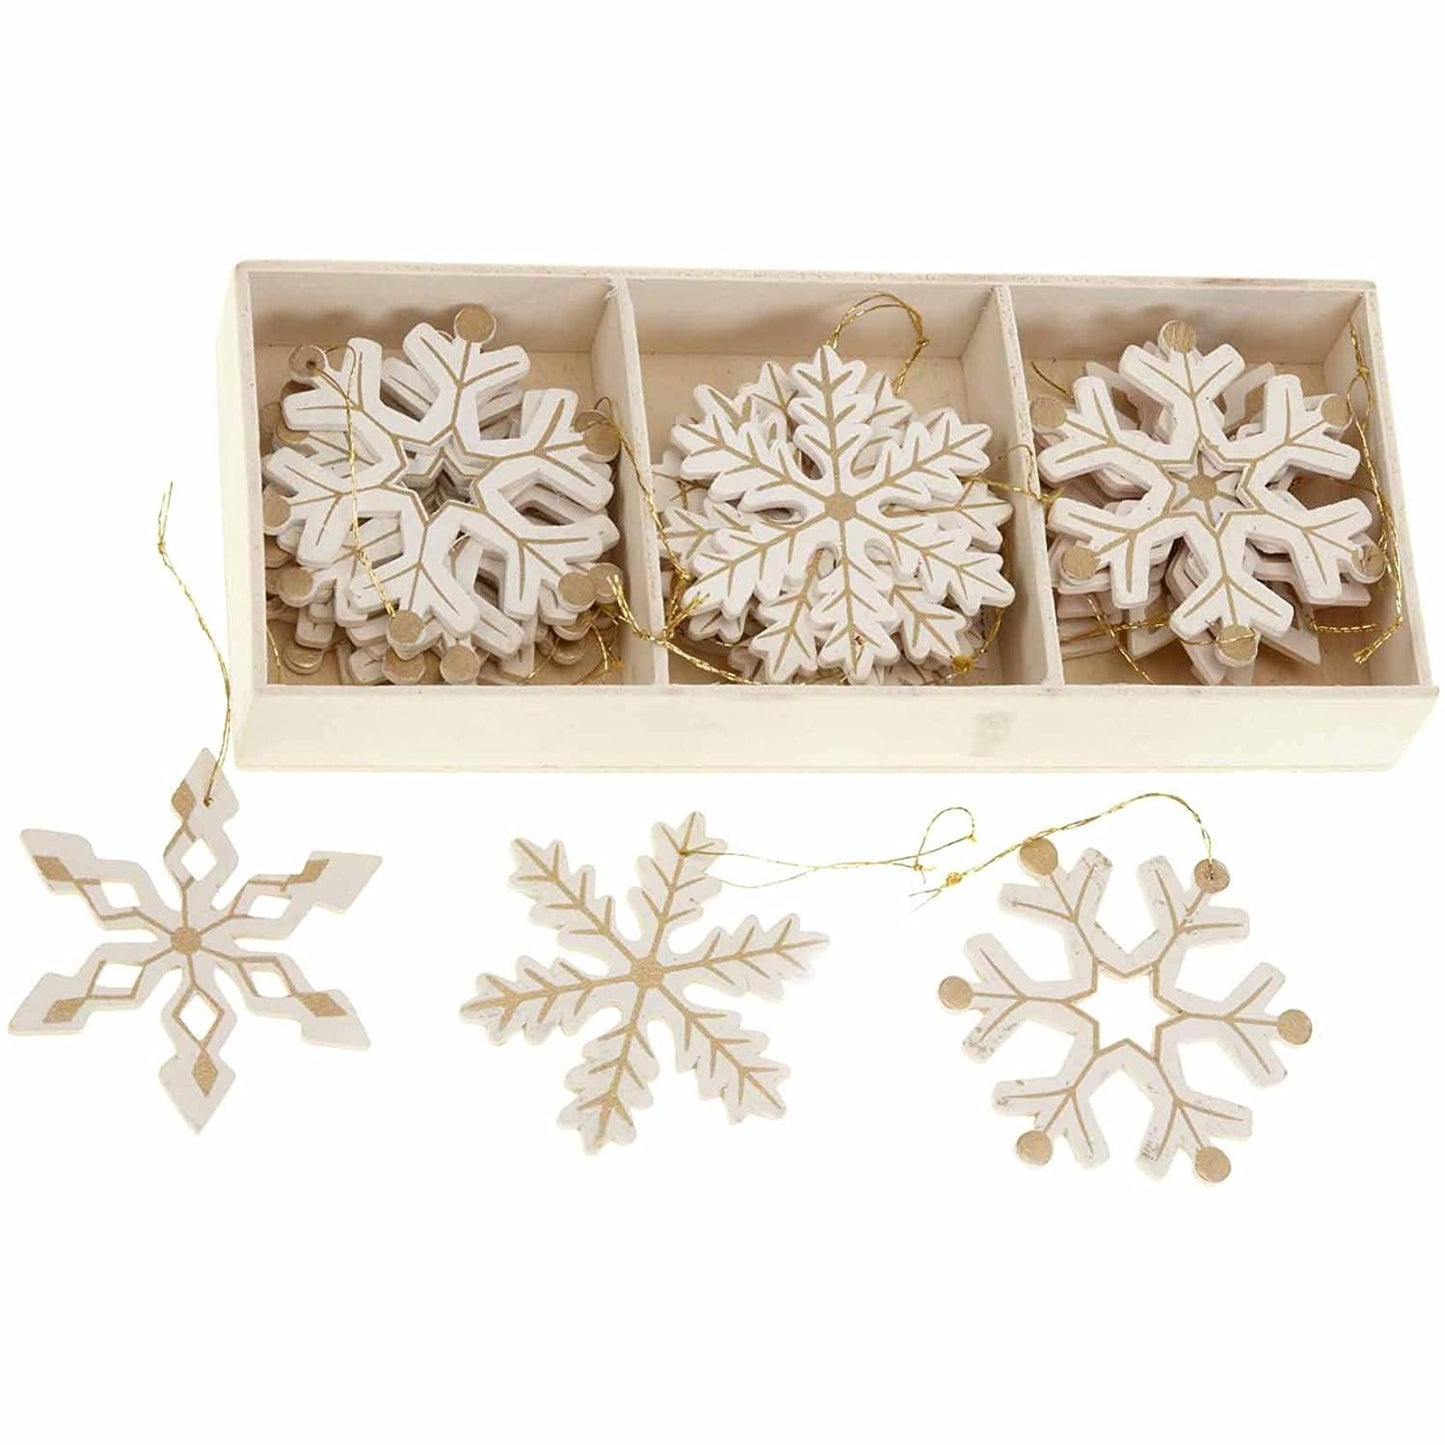 Wooden Snowflakes Gold Patterned Christmas Tree Decorations Box